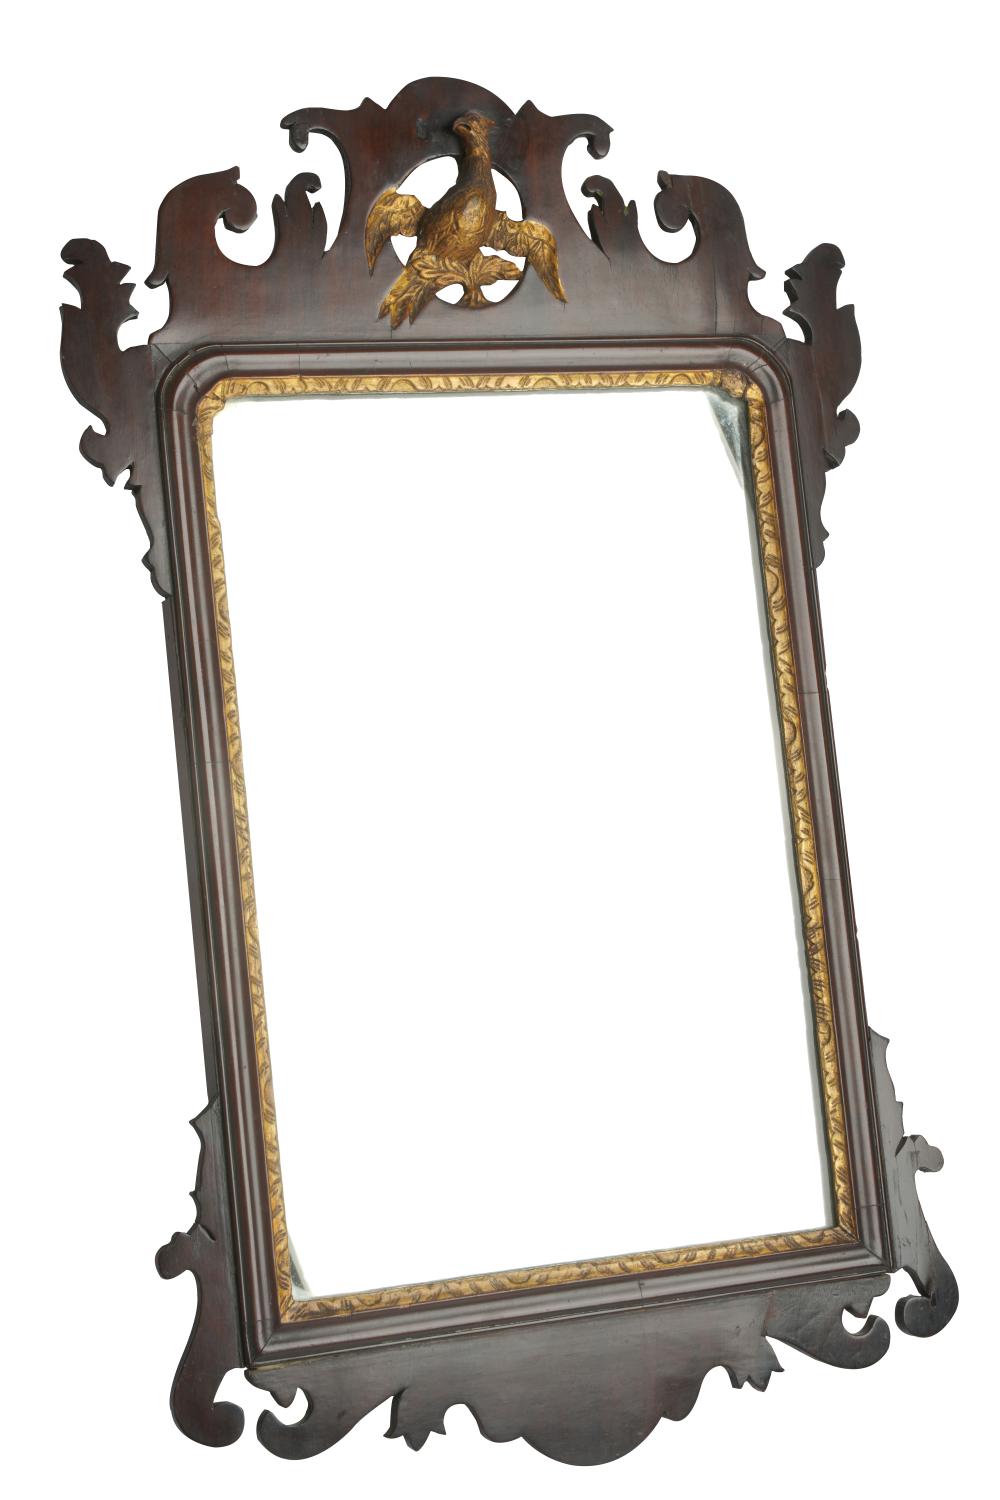 CHIPPENDALE STYLE WALL MIRRORthe